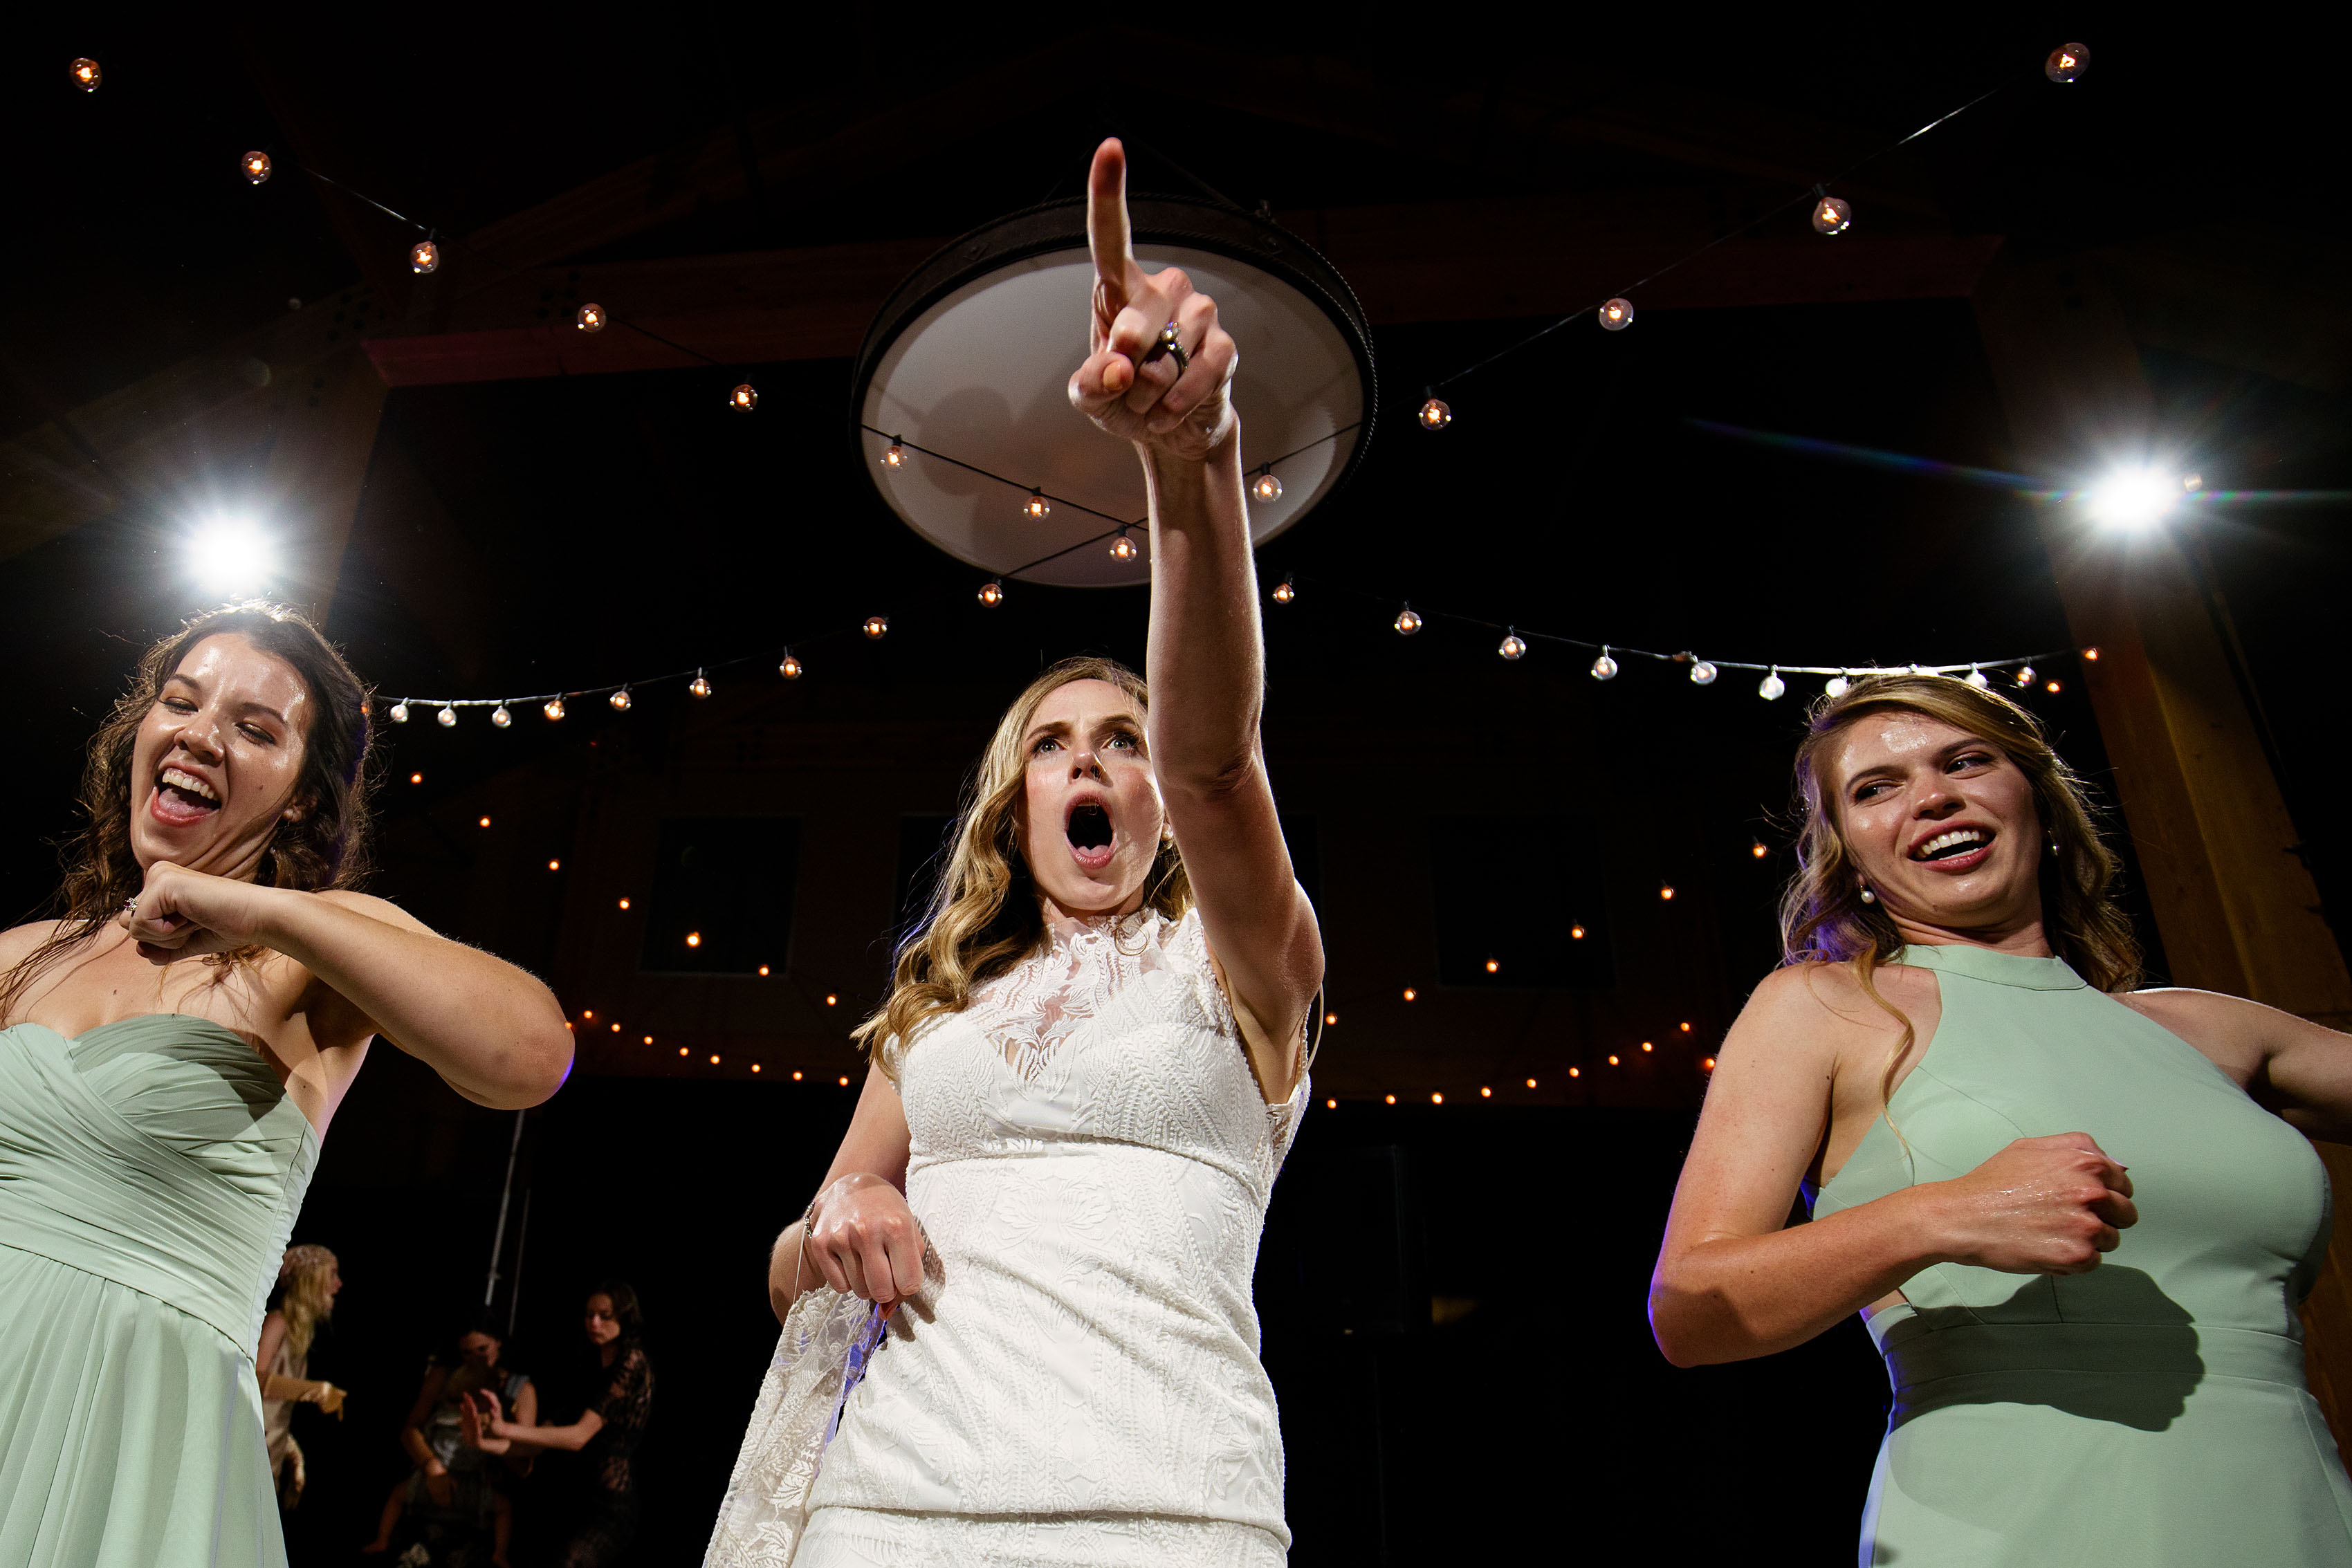 The bride points to a friend on the dance floor